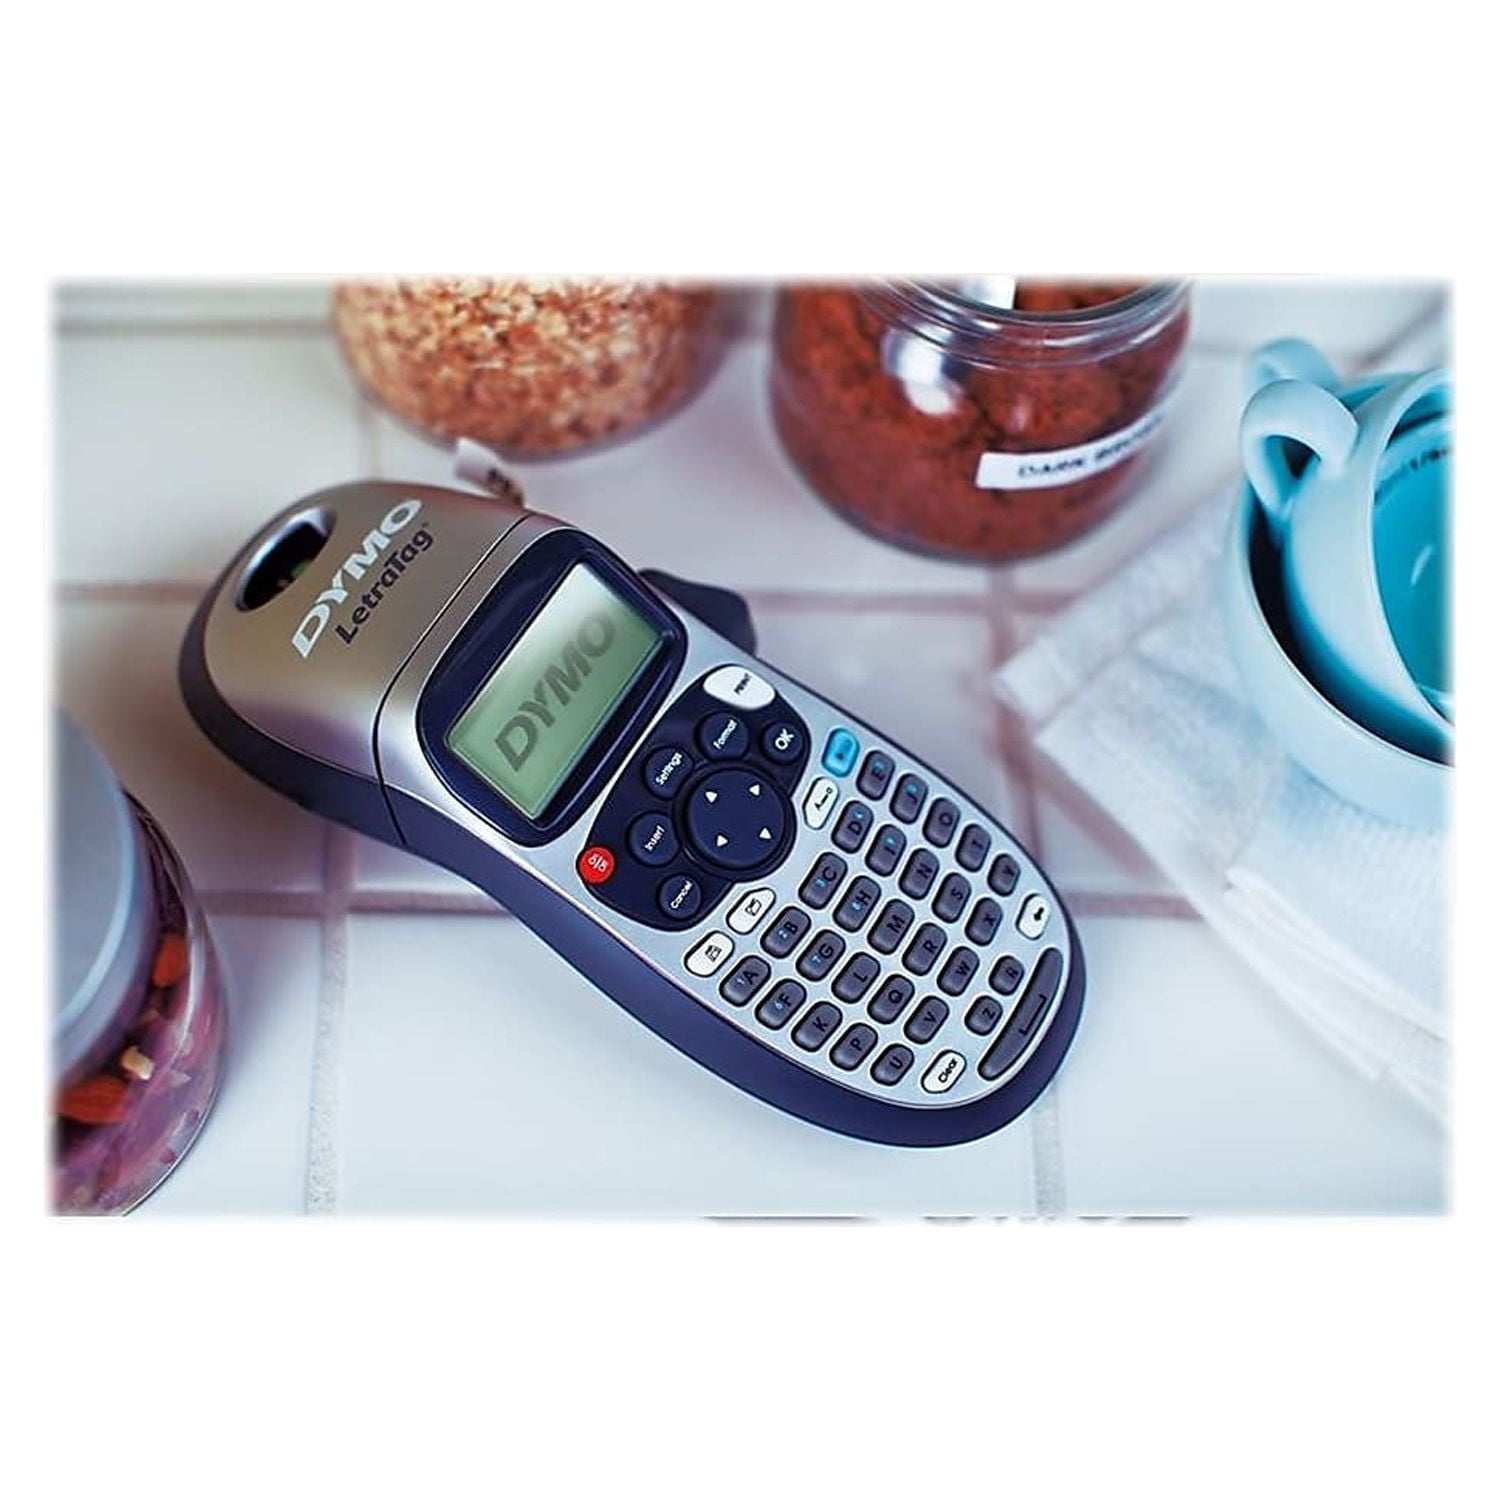 Dymo Letratag LT100H Personal Hand-Held Label Maker